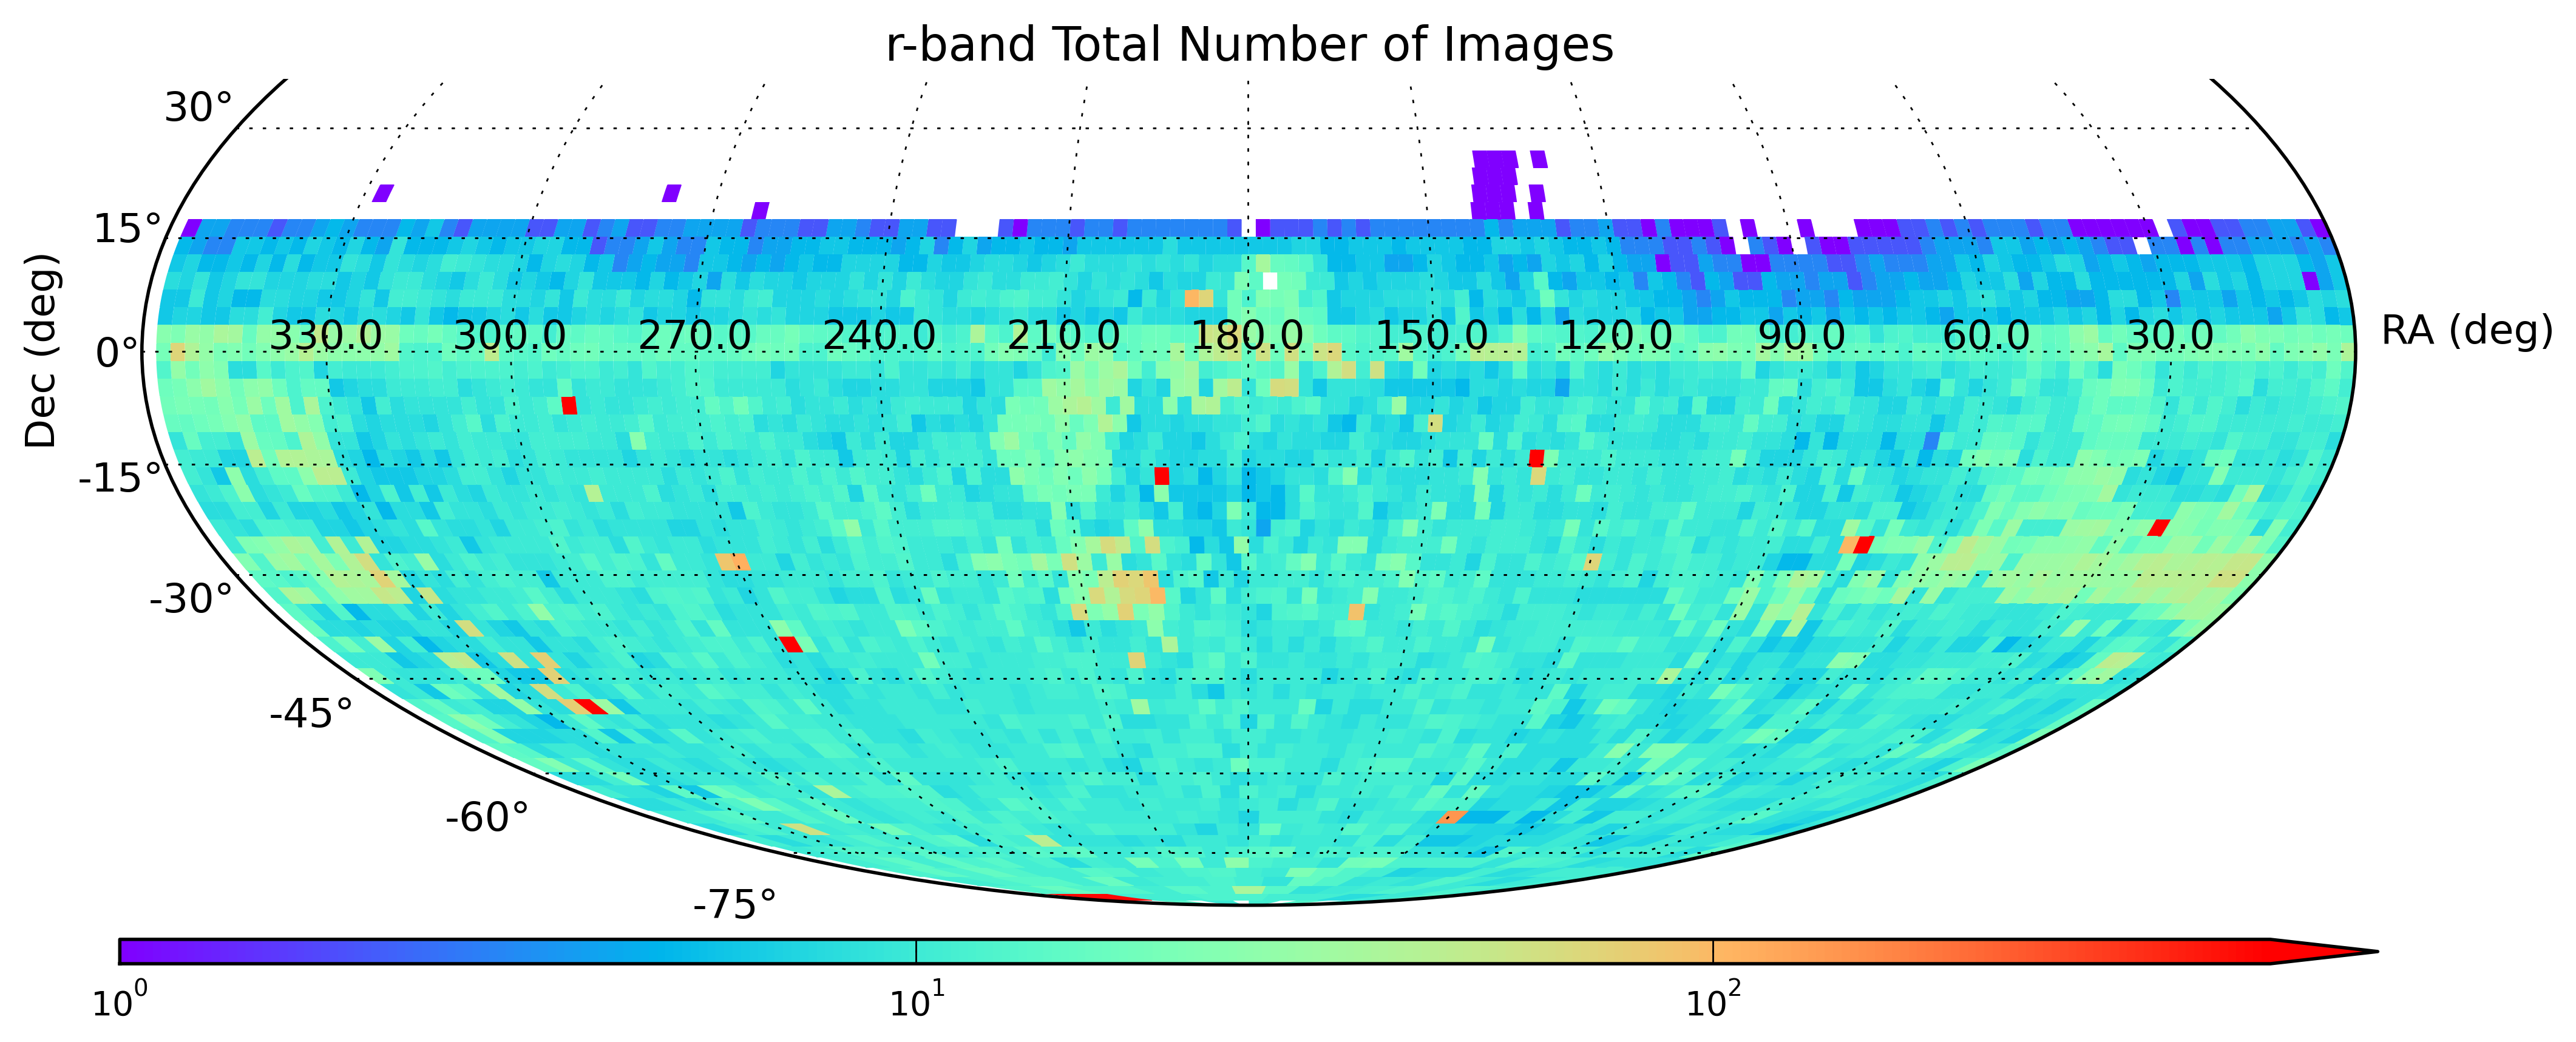 r-band coverage